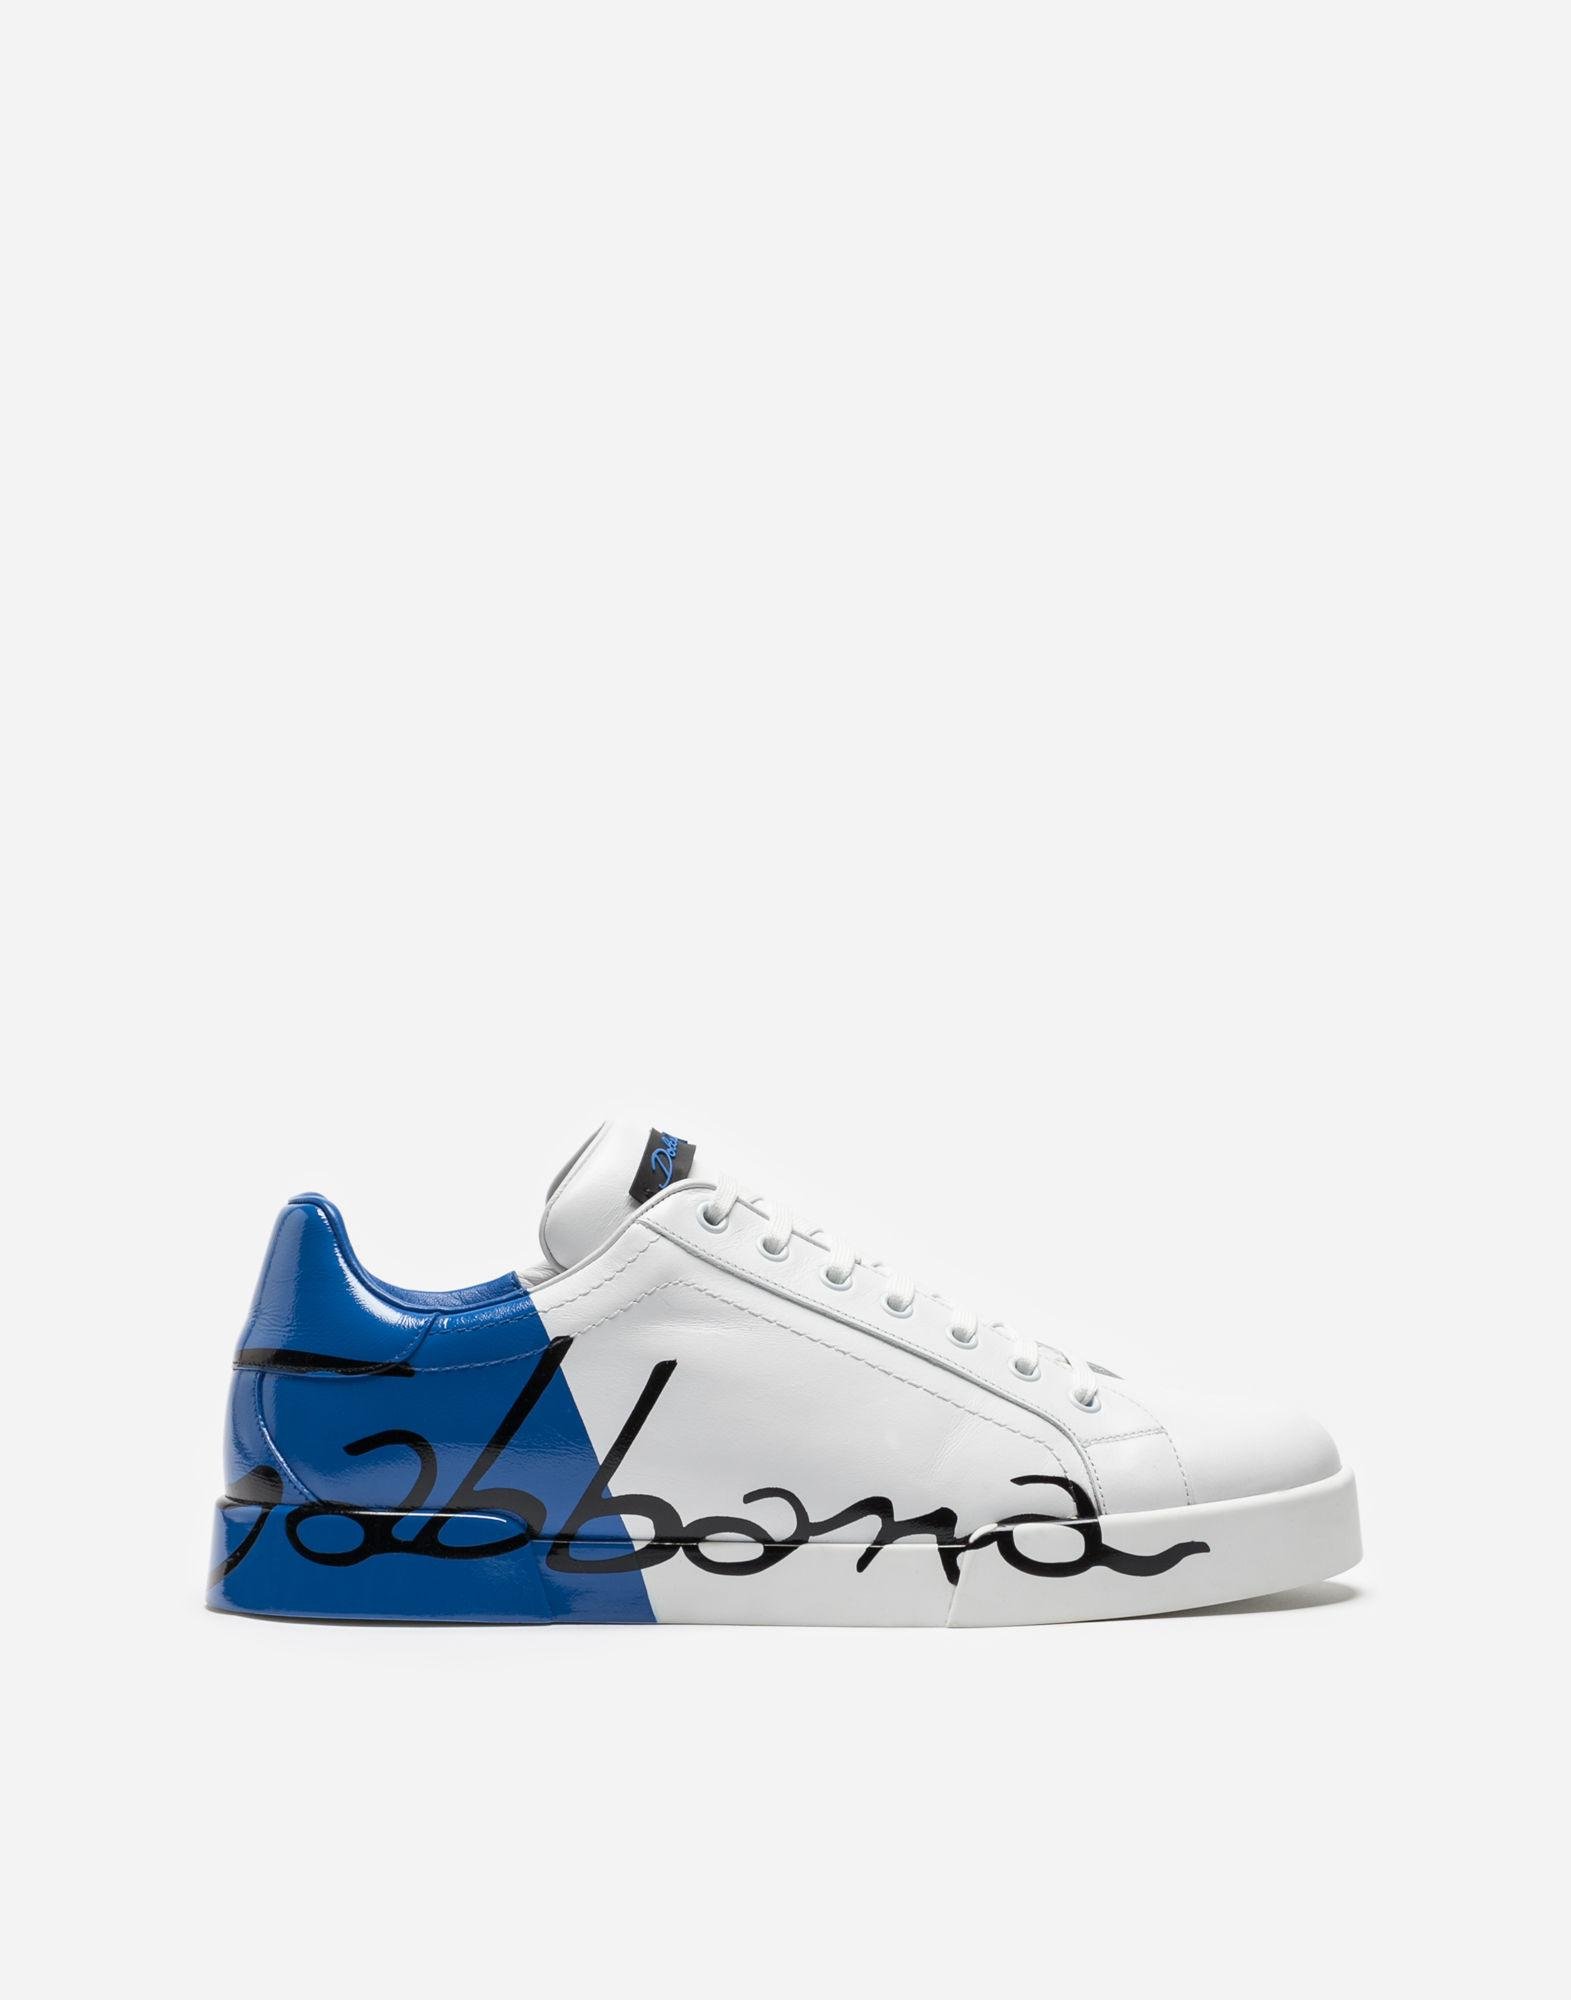 dolce and gabbana trainers blue